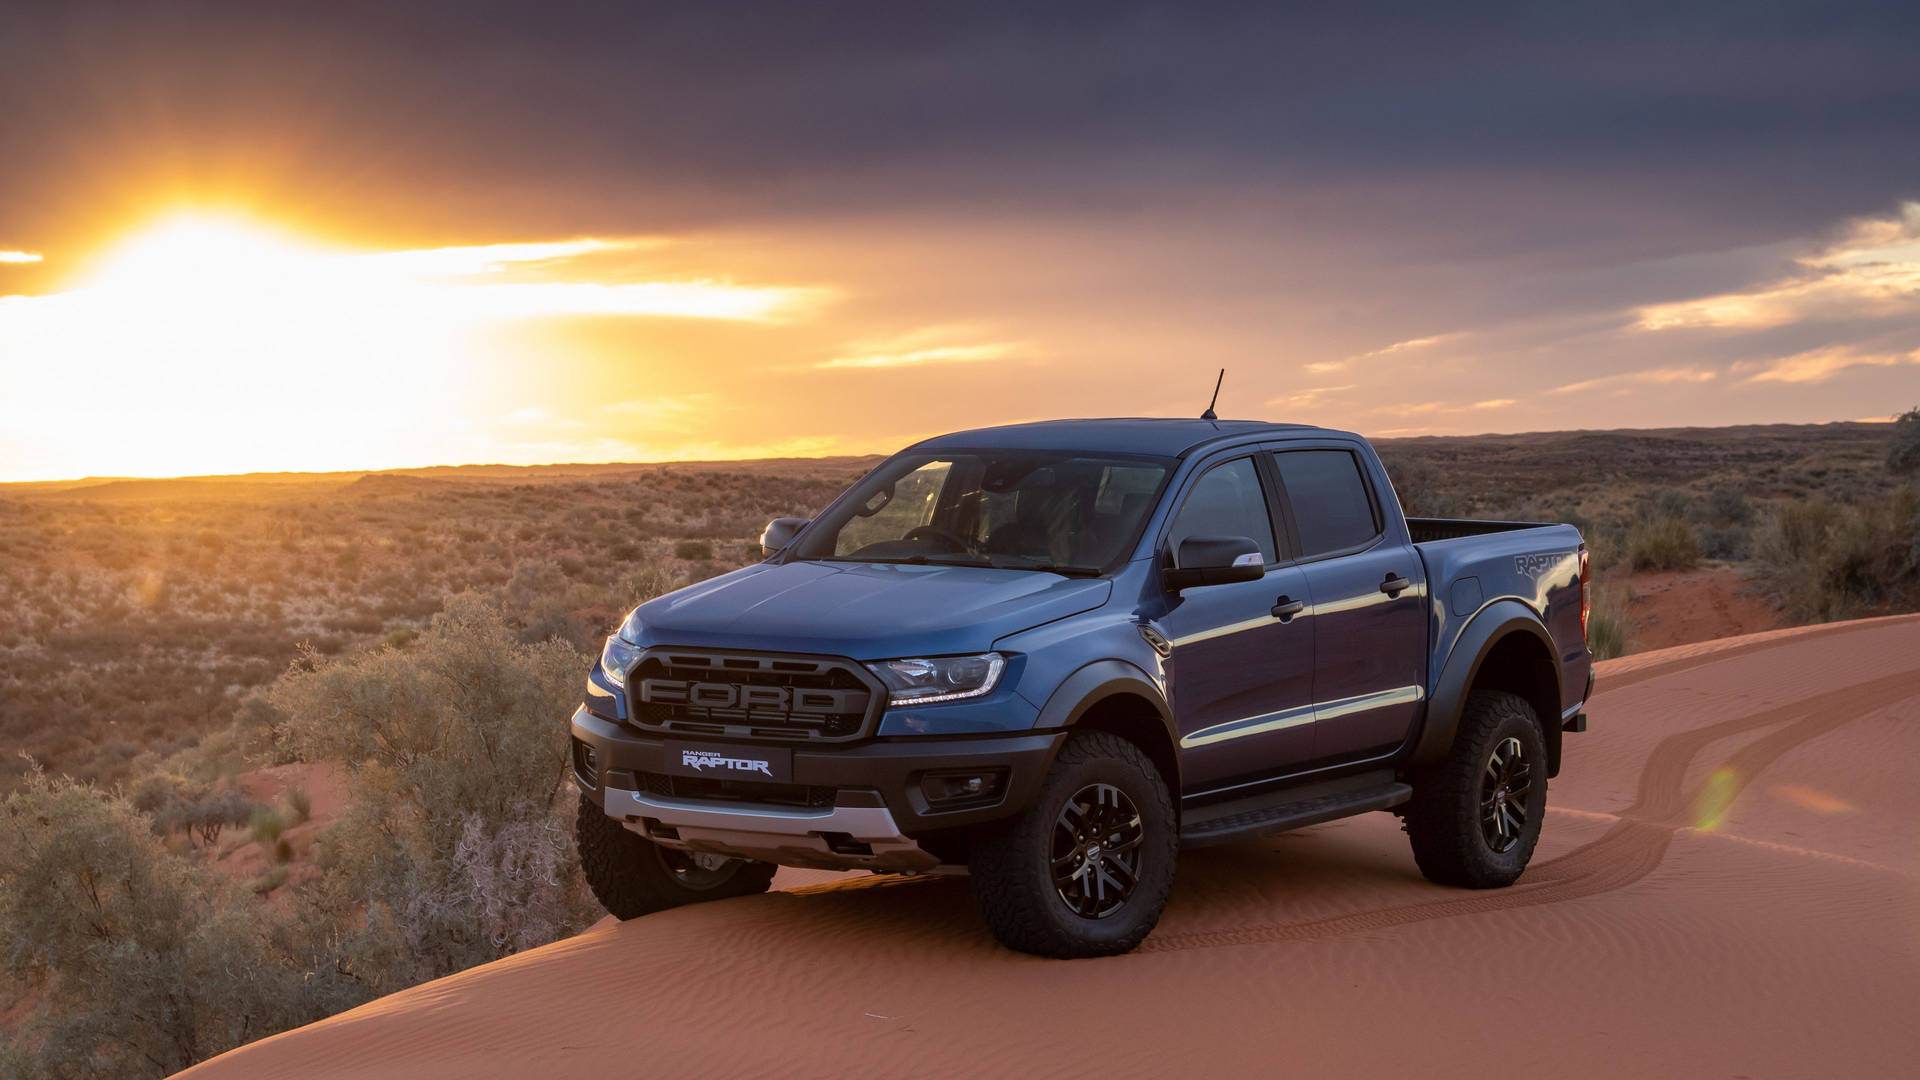 Ford Raptor With Sunset View Background